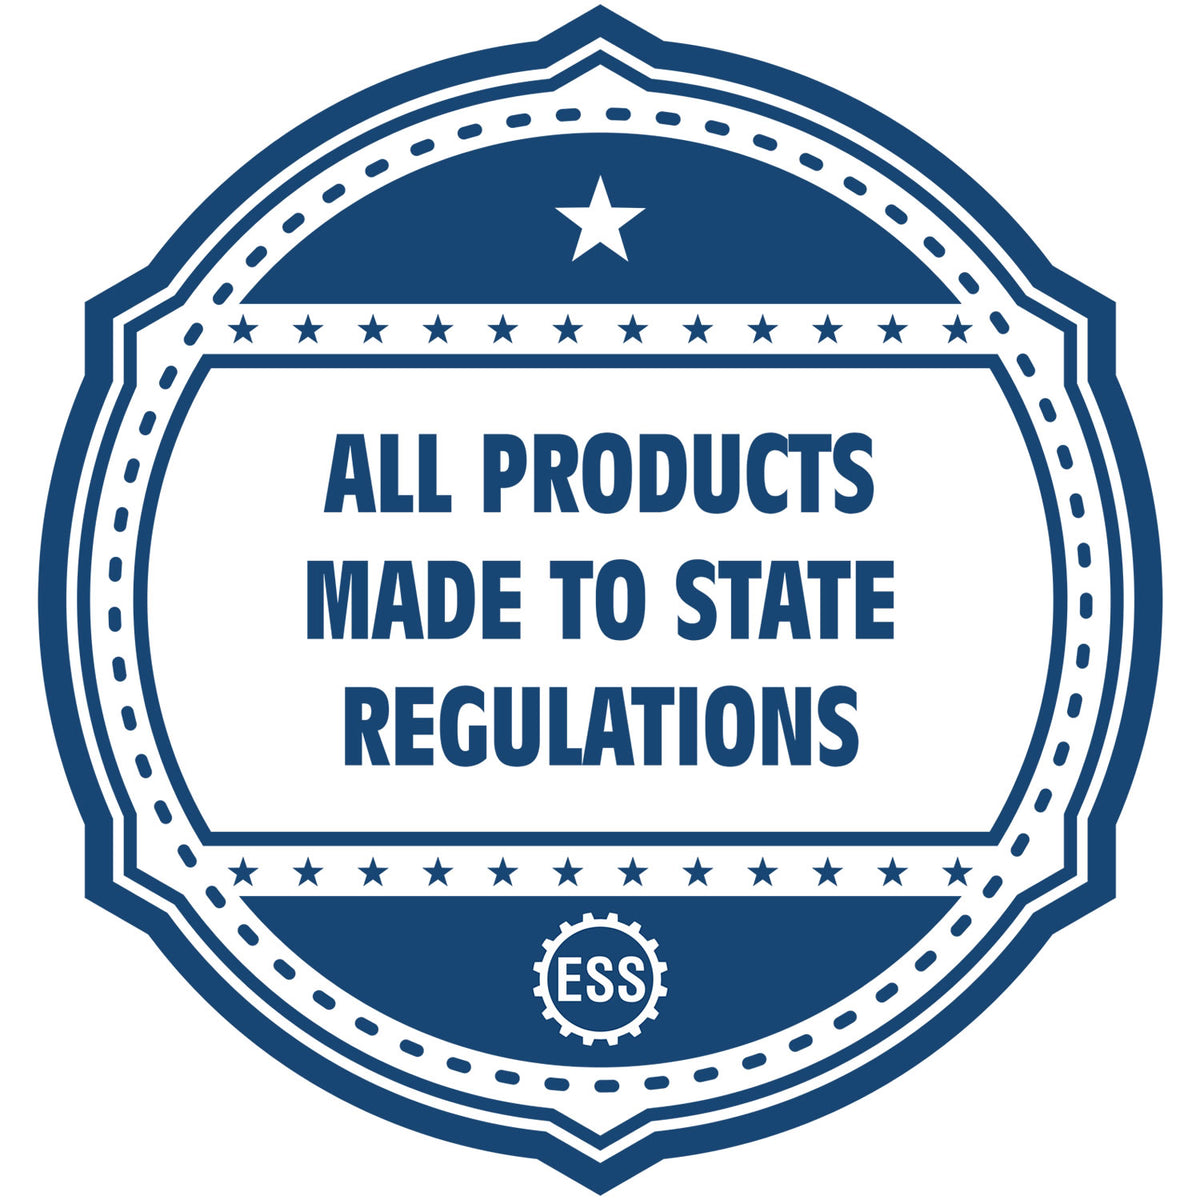 An icon or badge element for the Extended Long Reach Iowa Architect Seal Embosser showing that this product is made in compliance with state regulations.